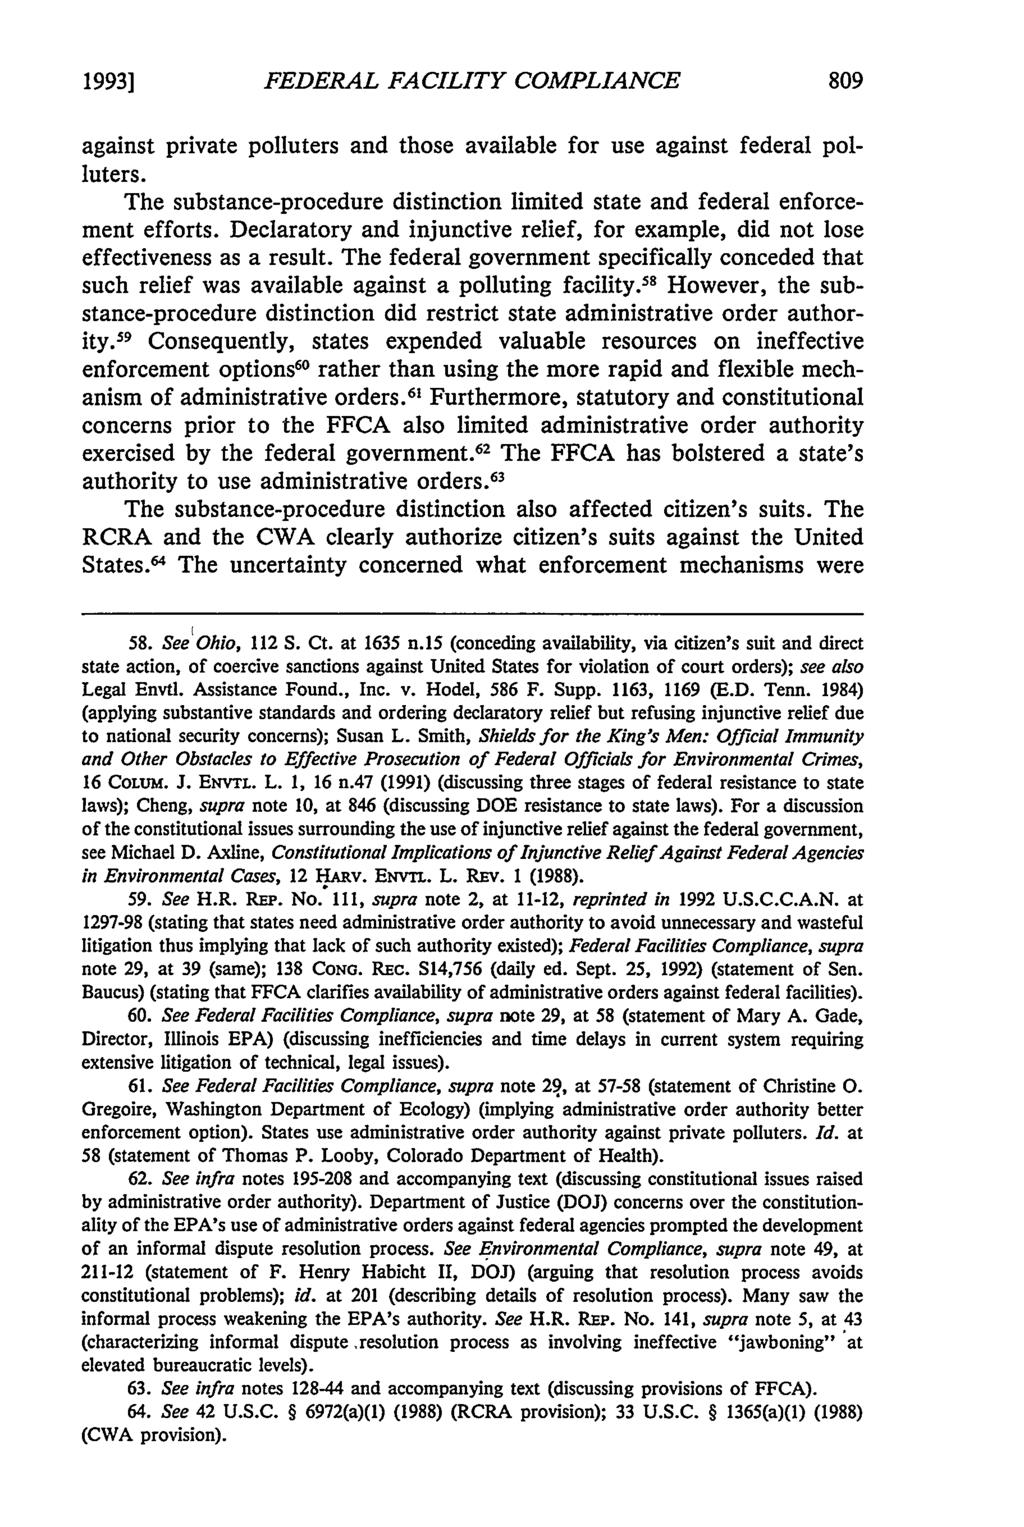 1993] FEDERAL FACILITY COMPLIANCE against private polluters and those available for use against federal polluters. The substance-procedure distinction limited state and federal enforcement efforts.